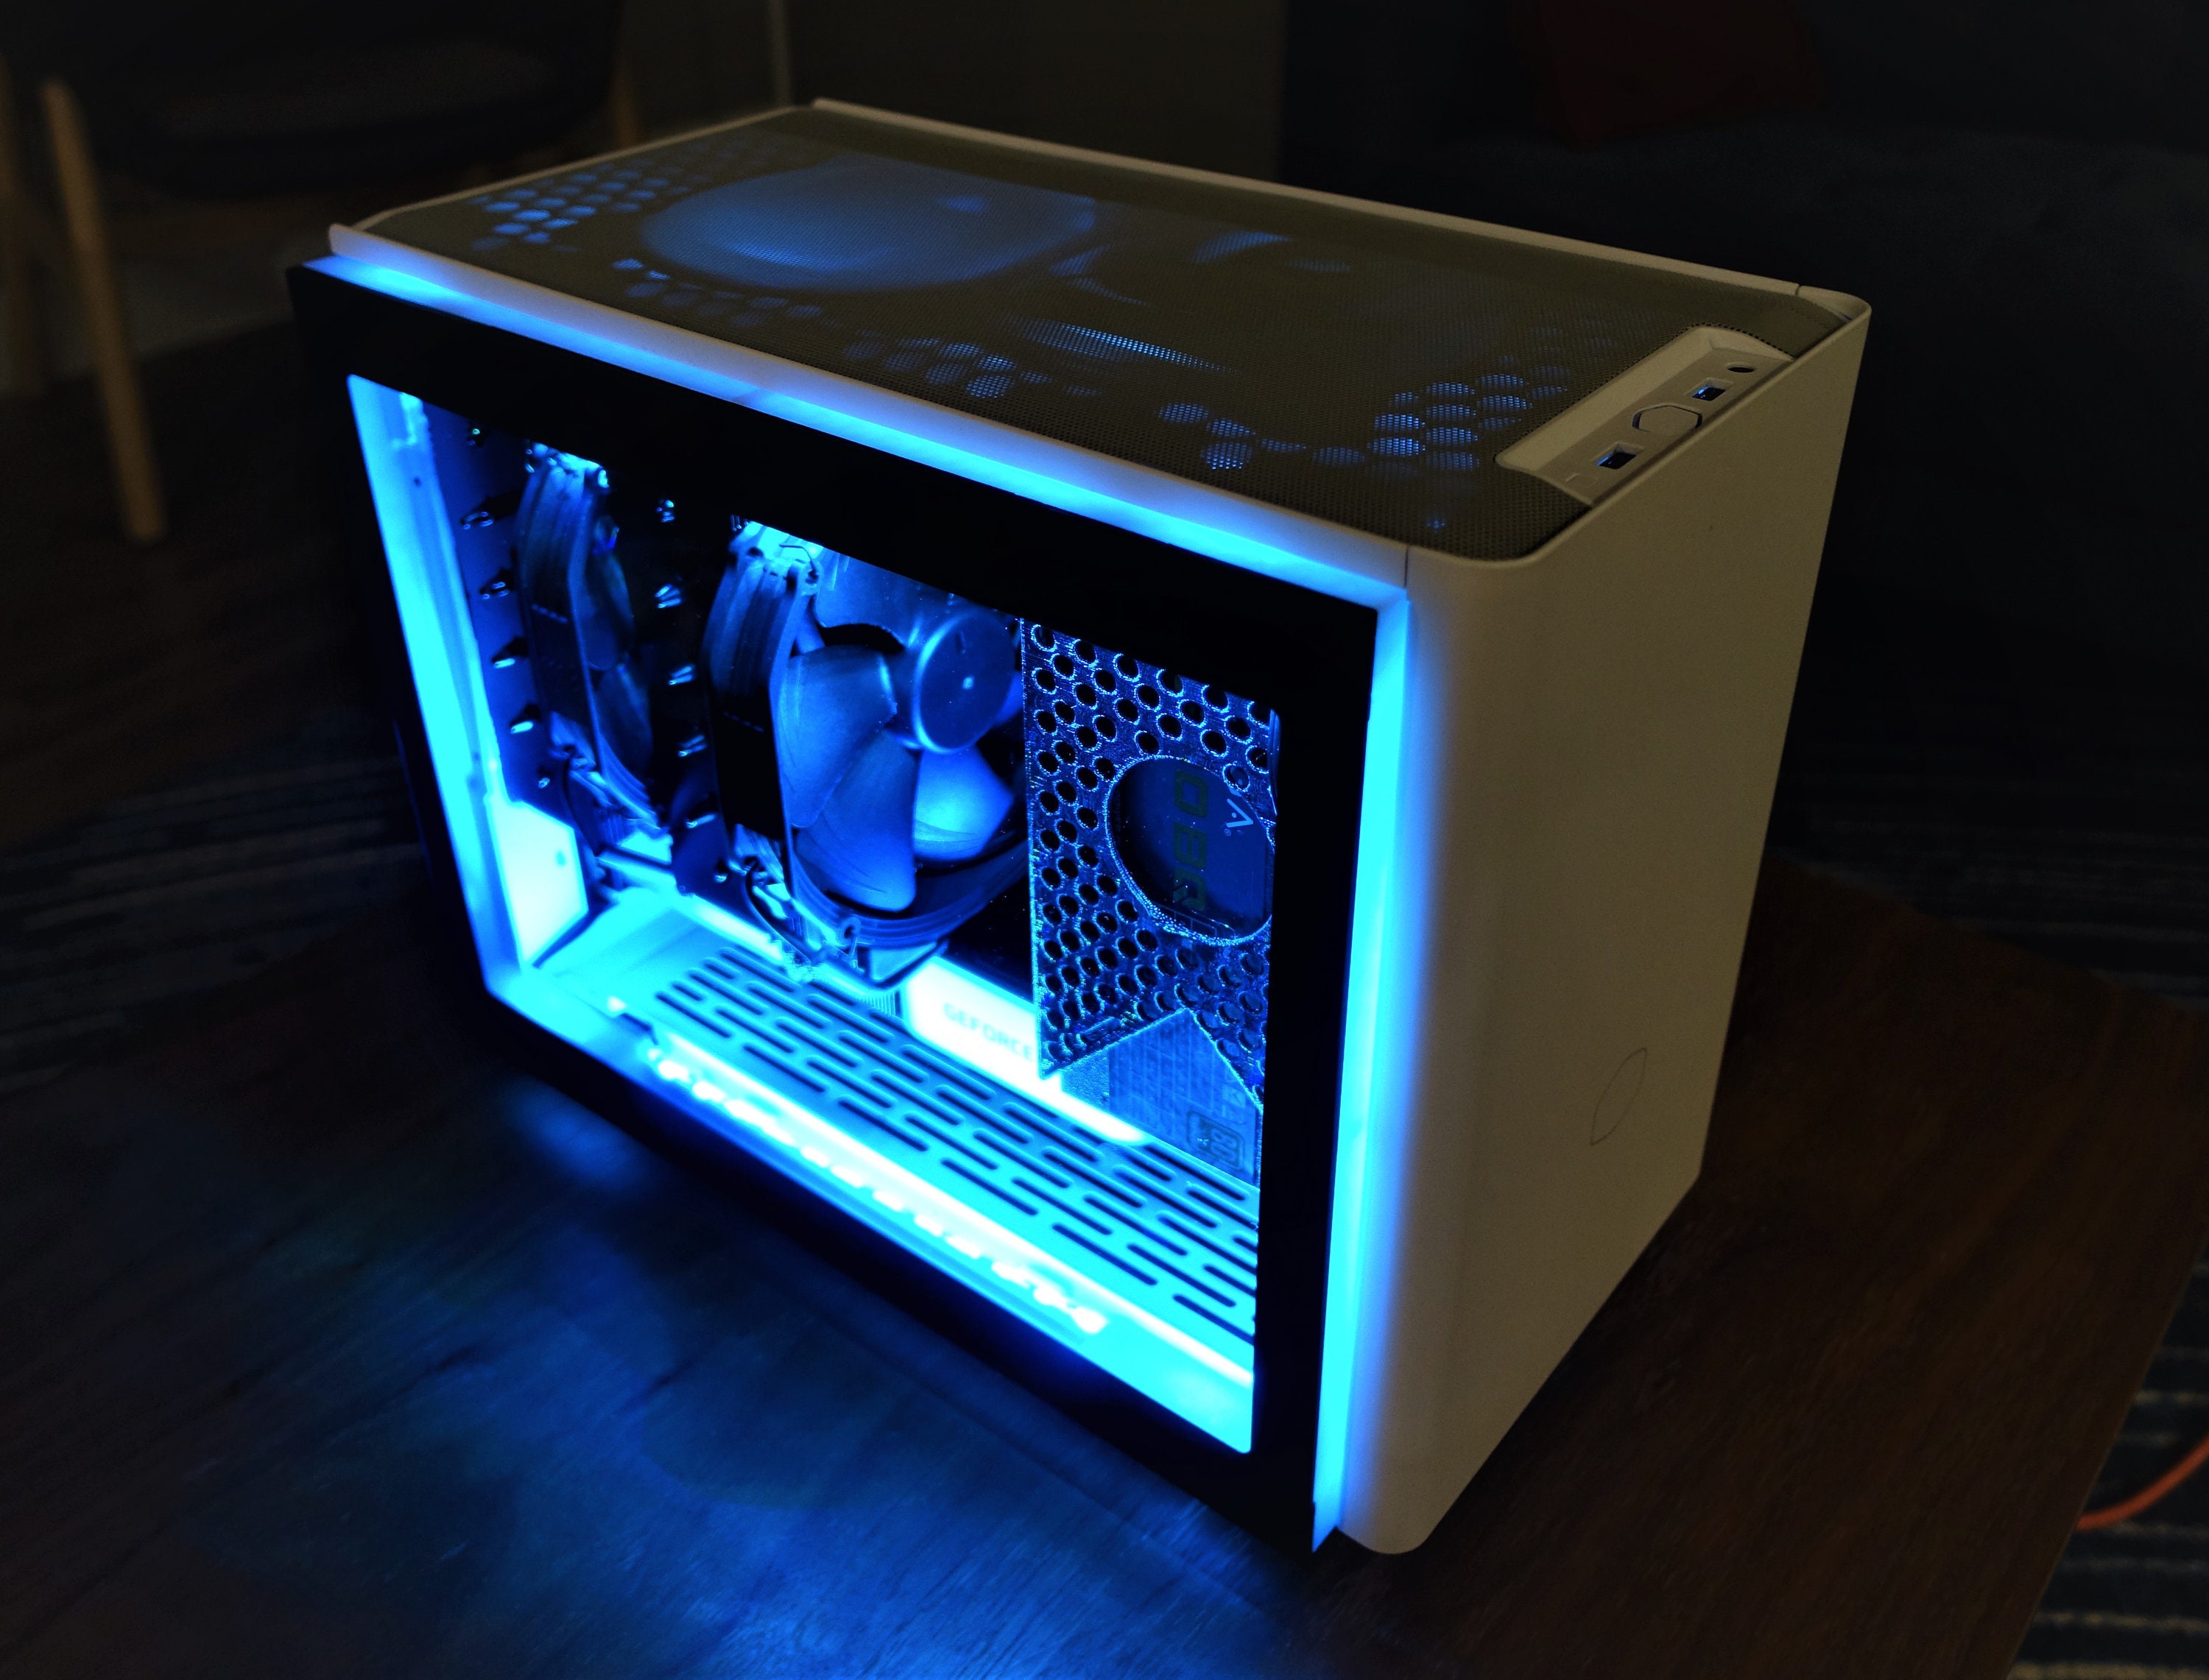 Cooler Master Masterbox NR200 Chassis Review - Funky Kit